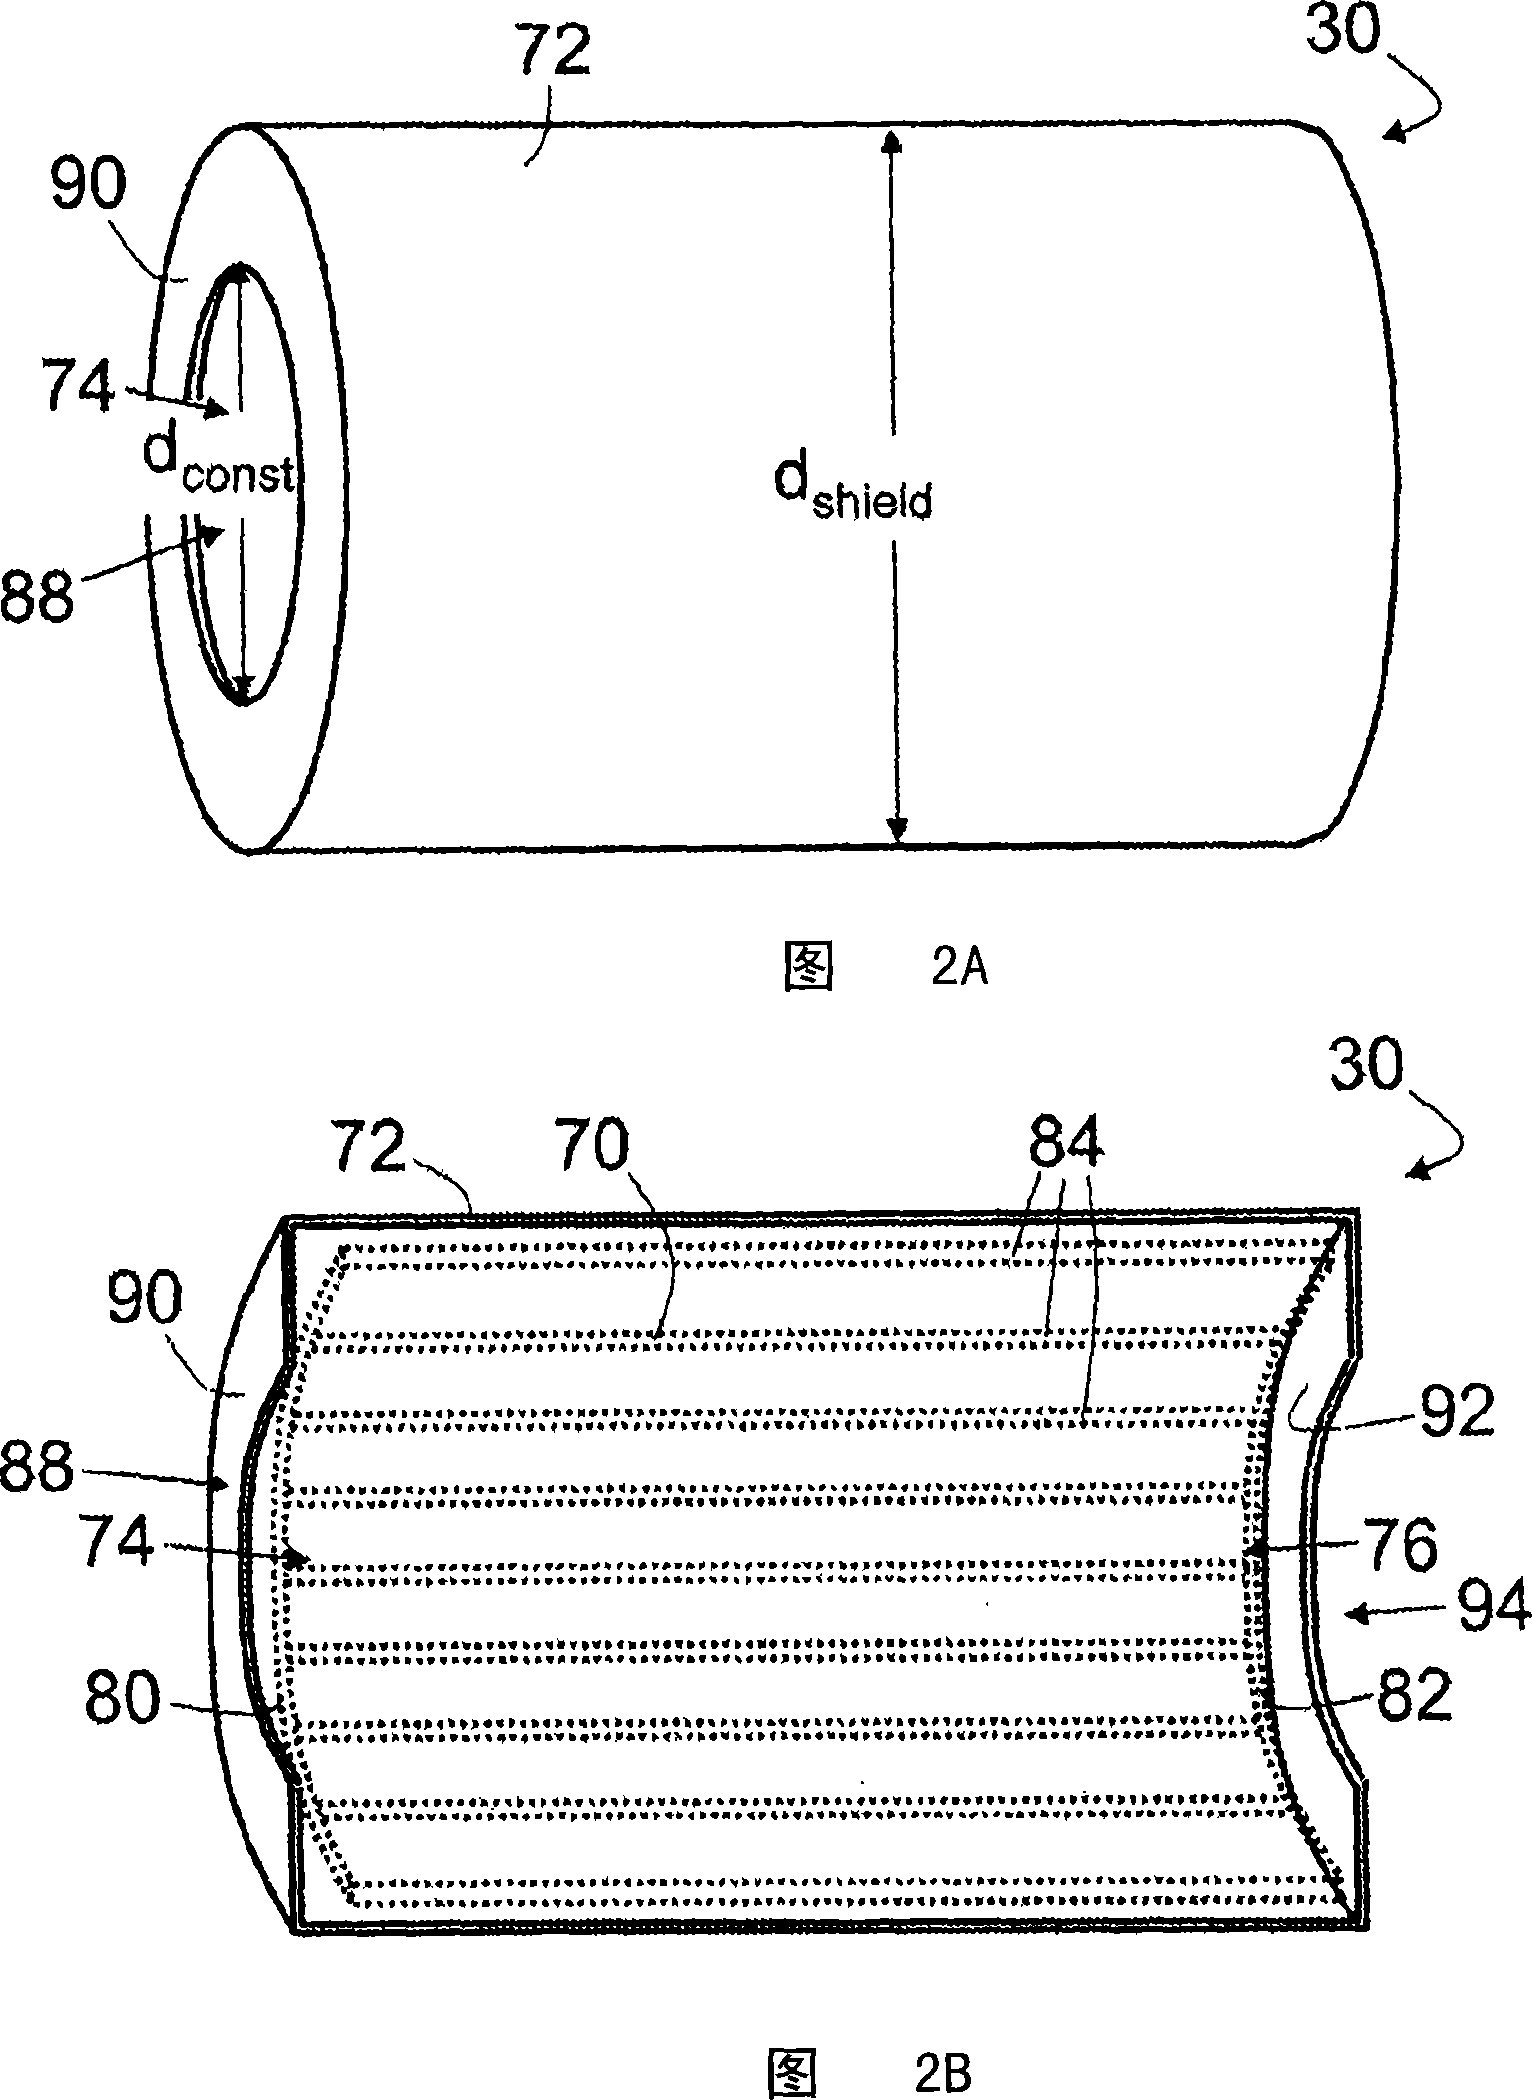 Electromagnetic shielding for high field MRI coils